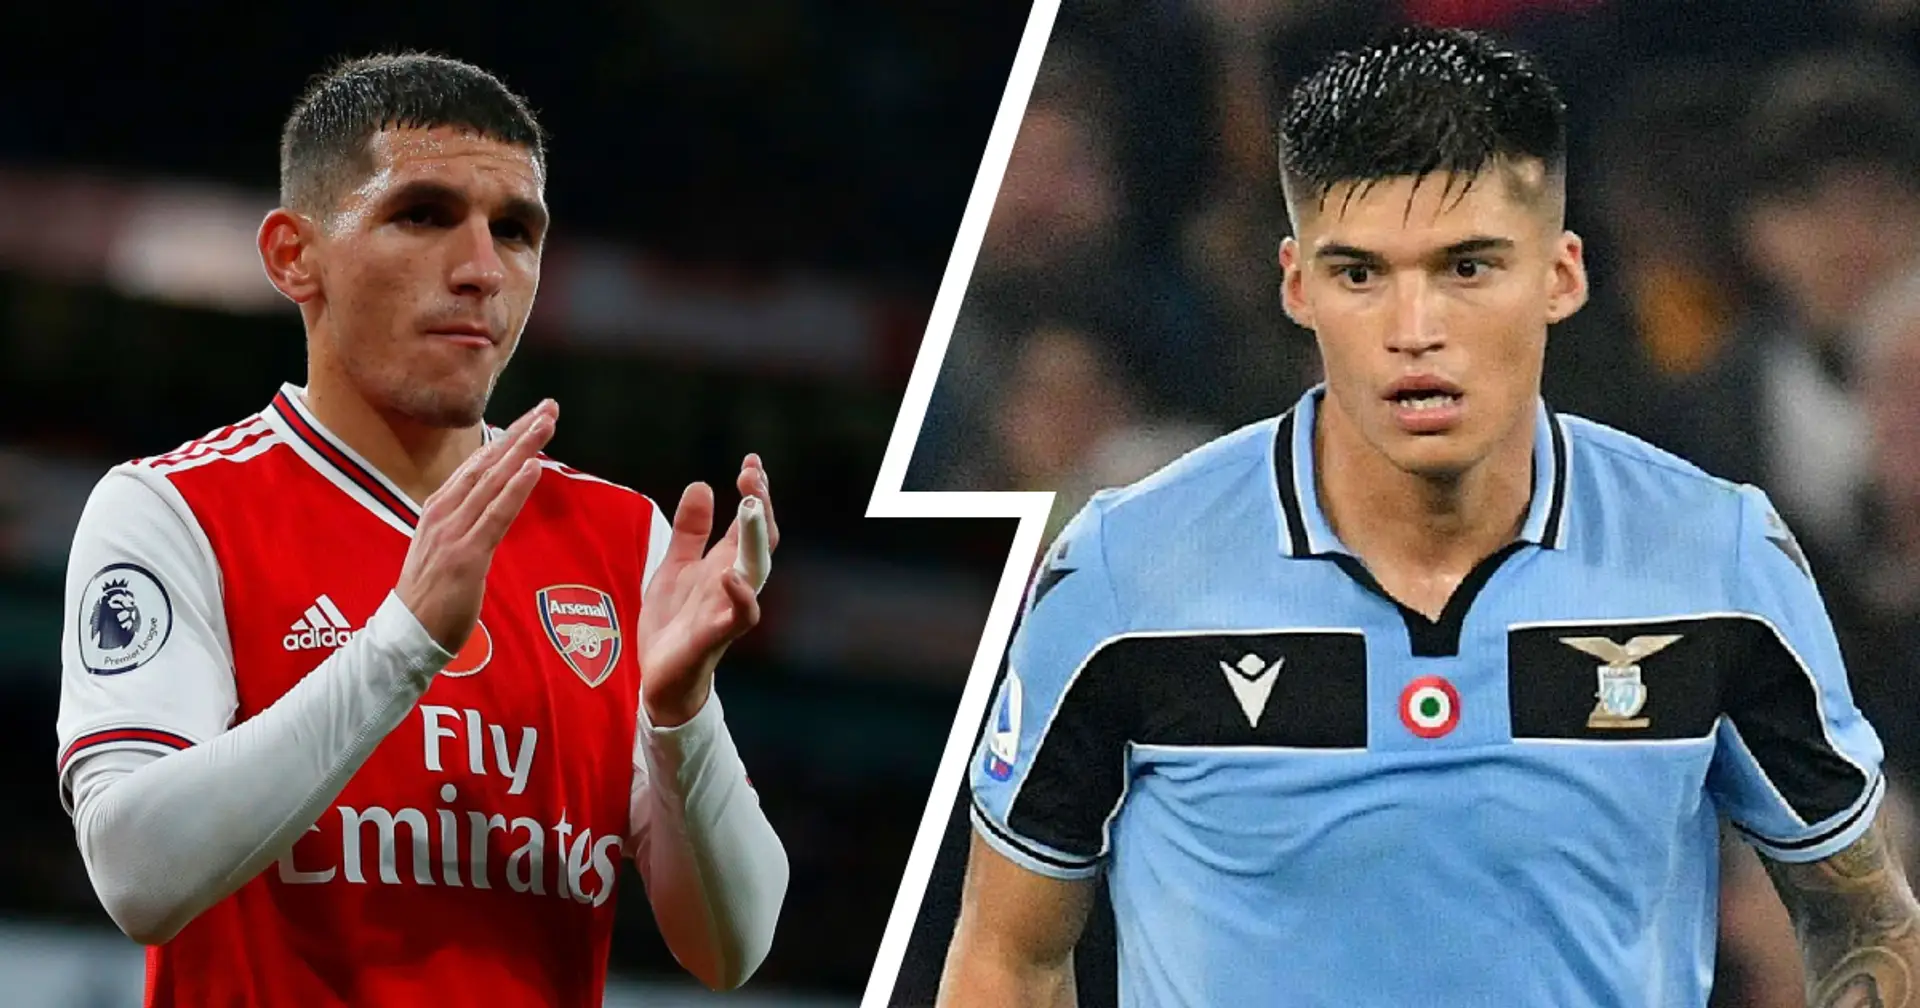 Lazio open talks with Arsenal over Torreira, Correa to be included in swap deal (reliability: 5 stars)